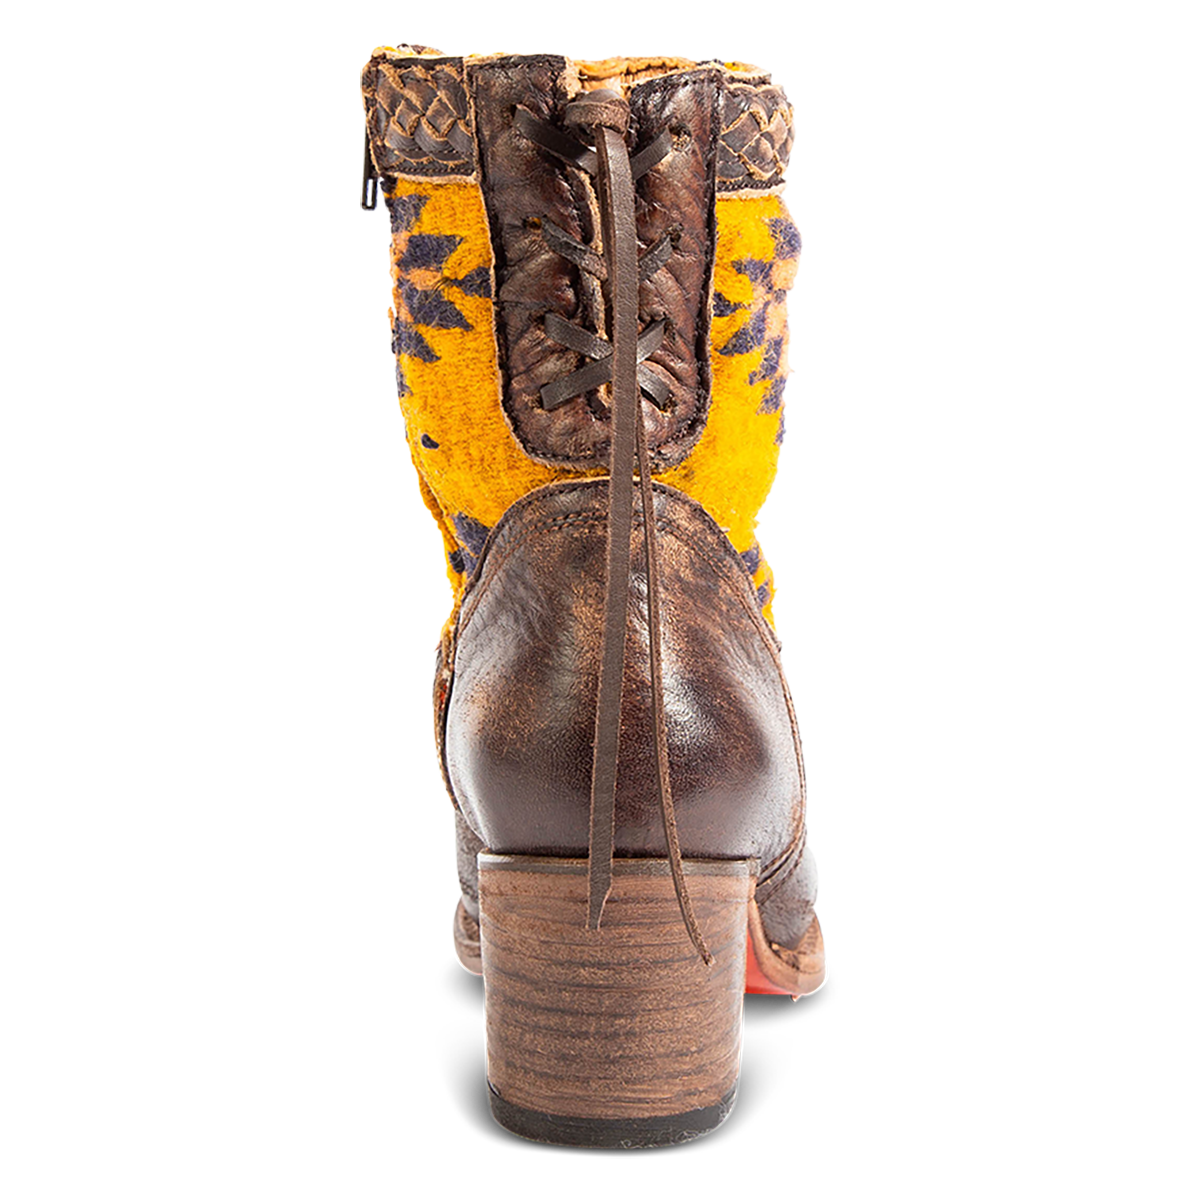 Back view showing adjustable leather lacing, a stacked heel and multi-colored woven detailing on FREEBIRD women's Songbird brown leather bootie